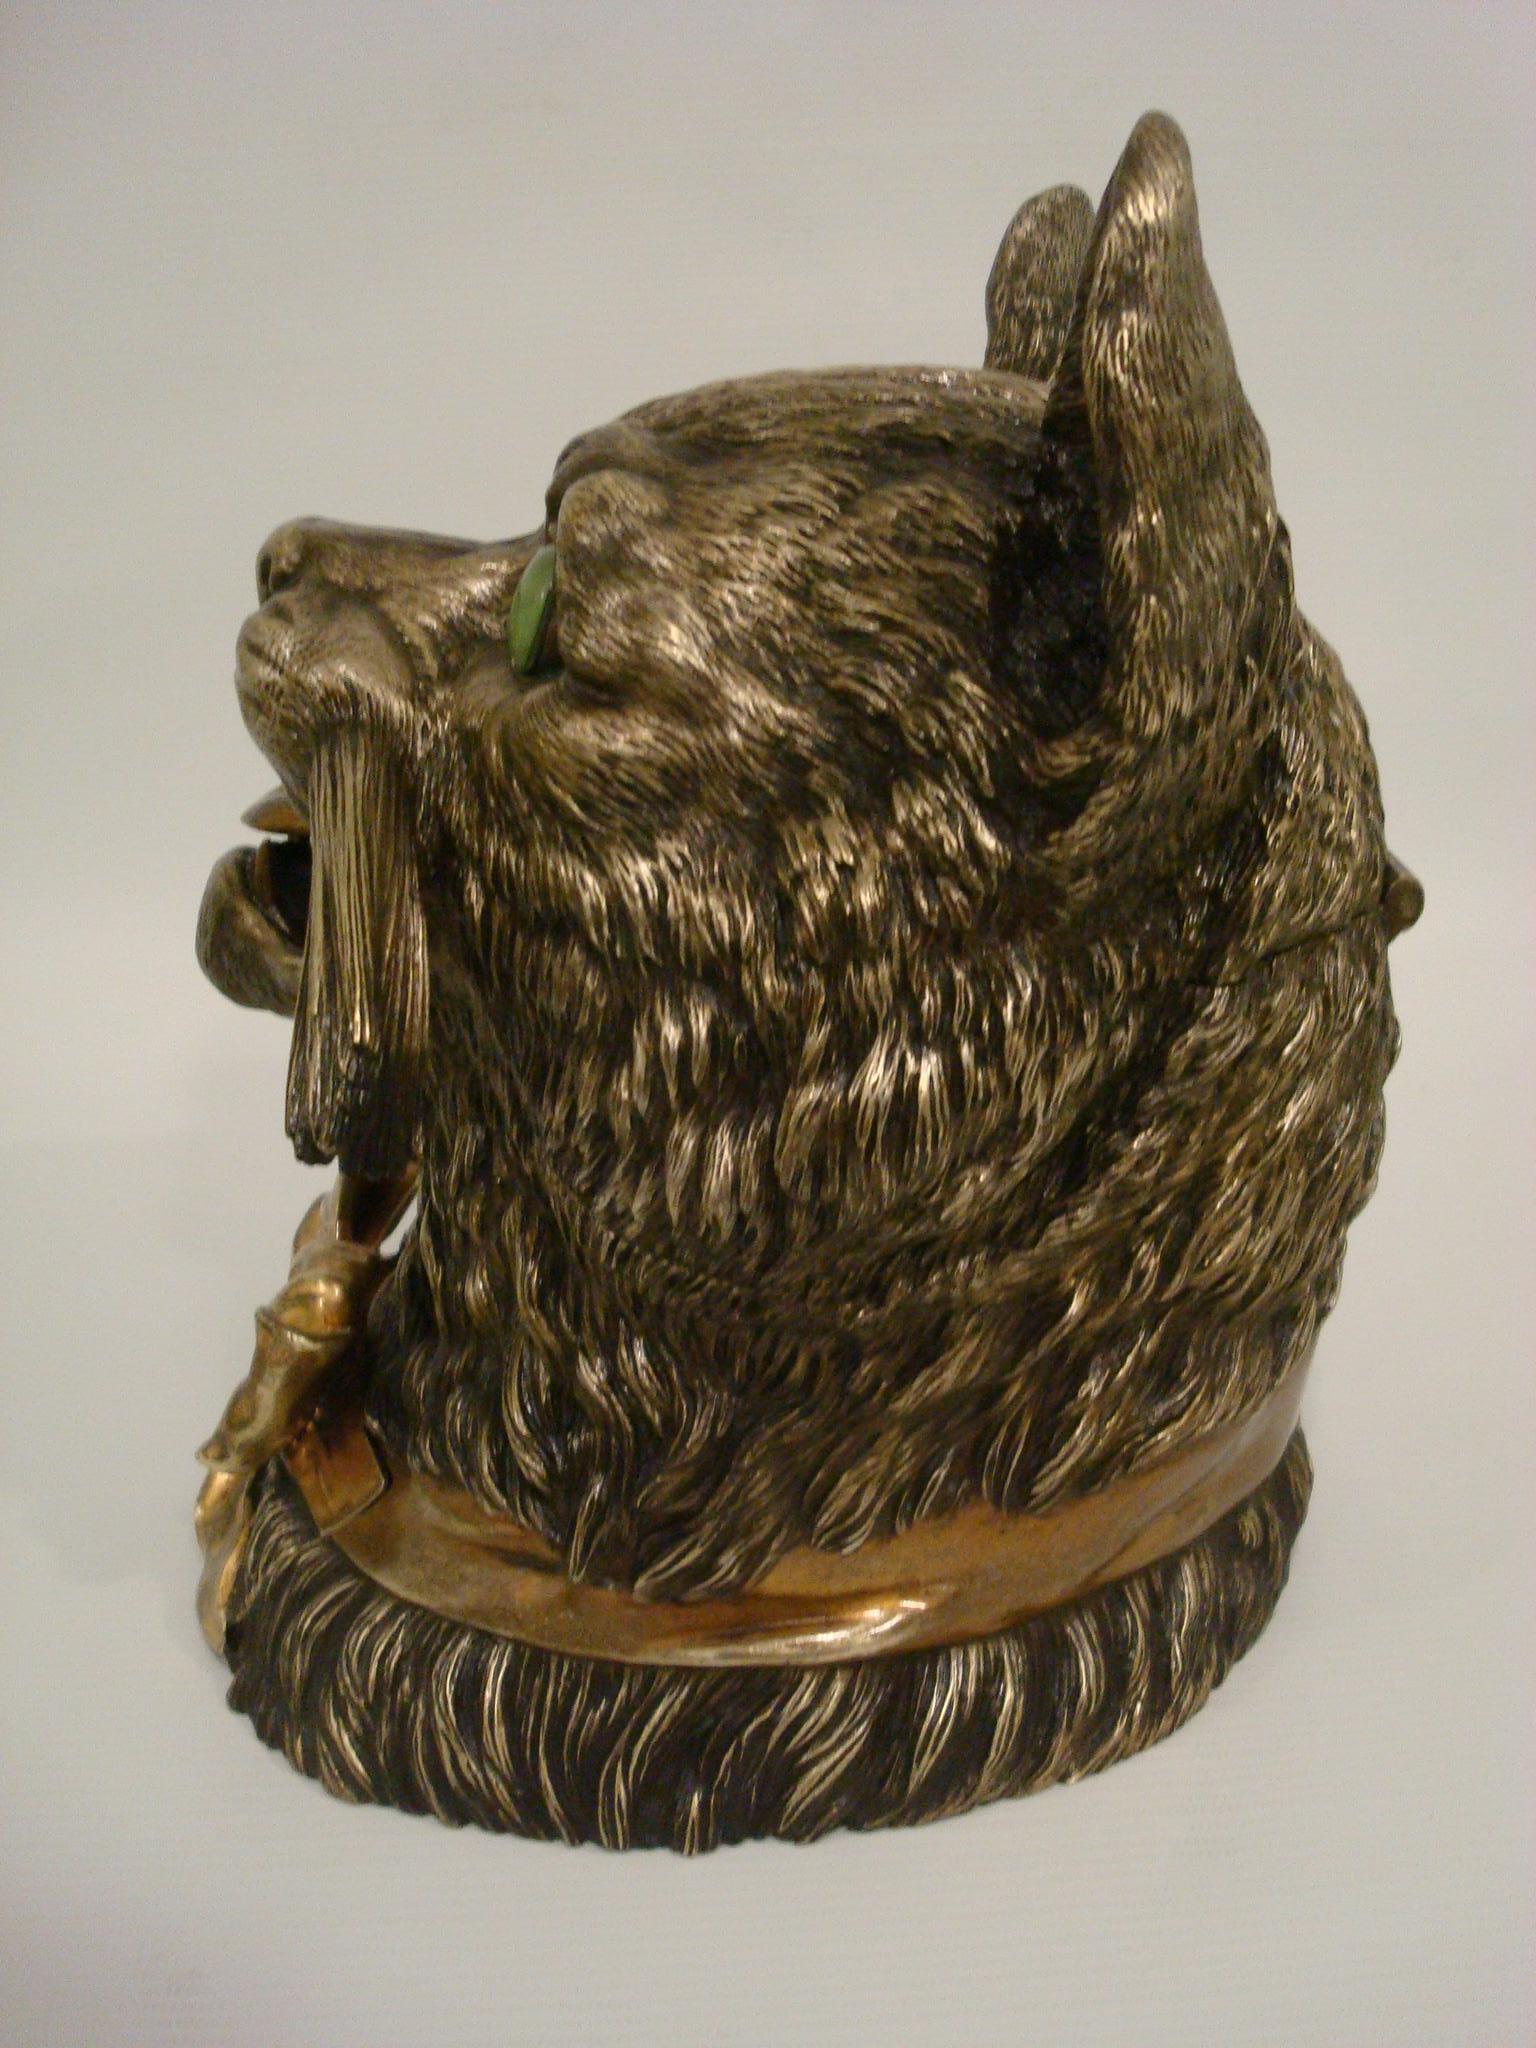 Novelty Bronze Cigars / Cigarettes Humidor Formed as a Cat's Head Sculpture For Sale 7